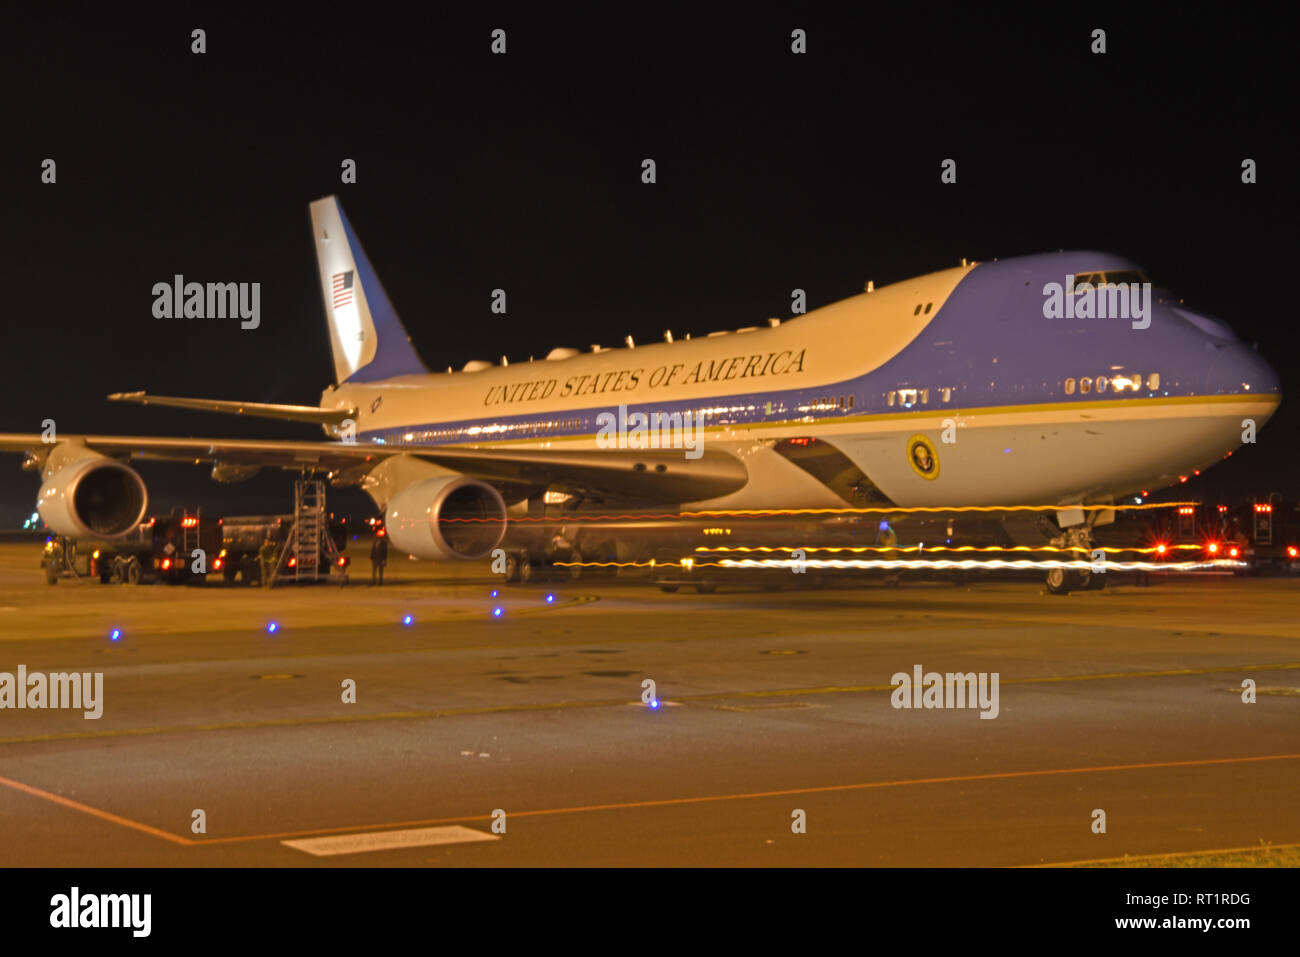 Air Force One receives fuel during a stop at RAF Mildenhall, England, Feb. 26, 2019. Air Force One, carrying President Donald J. Trump and a contingency of White House officials and media members, received fuel and logistical support before continuing on the journey to Hanoi, the capital city of Vietnam, for the president’s second summit North Korean leader Kim-Jong Un. (U.S. Air Force photo by Airman 1st Class Brandon Esau) Stock Photo